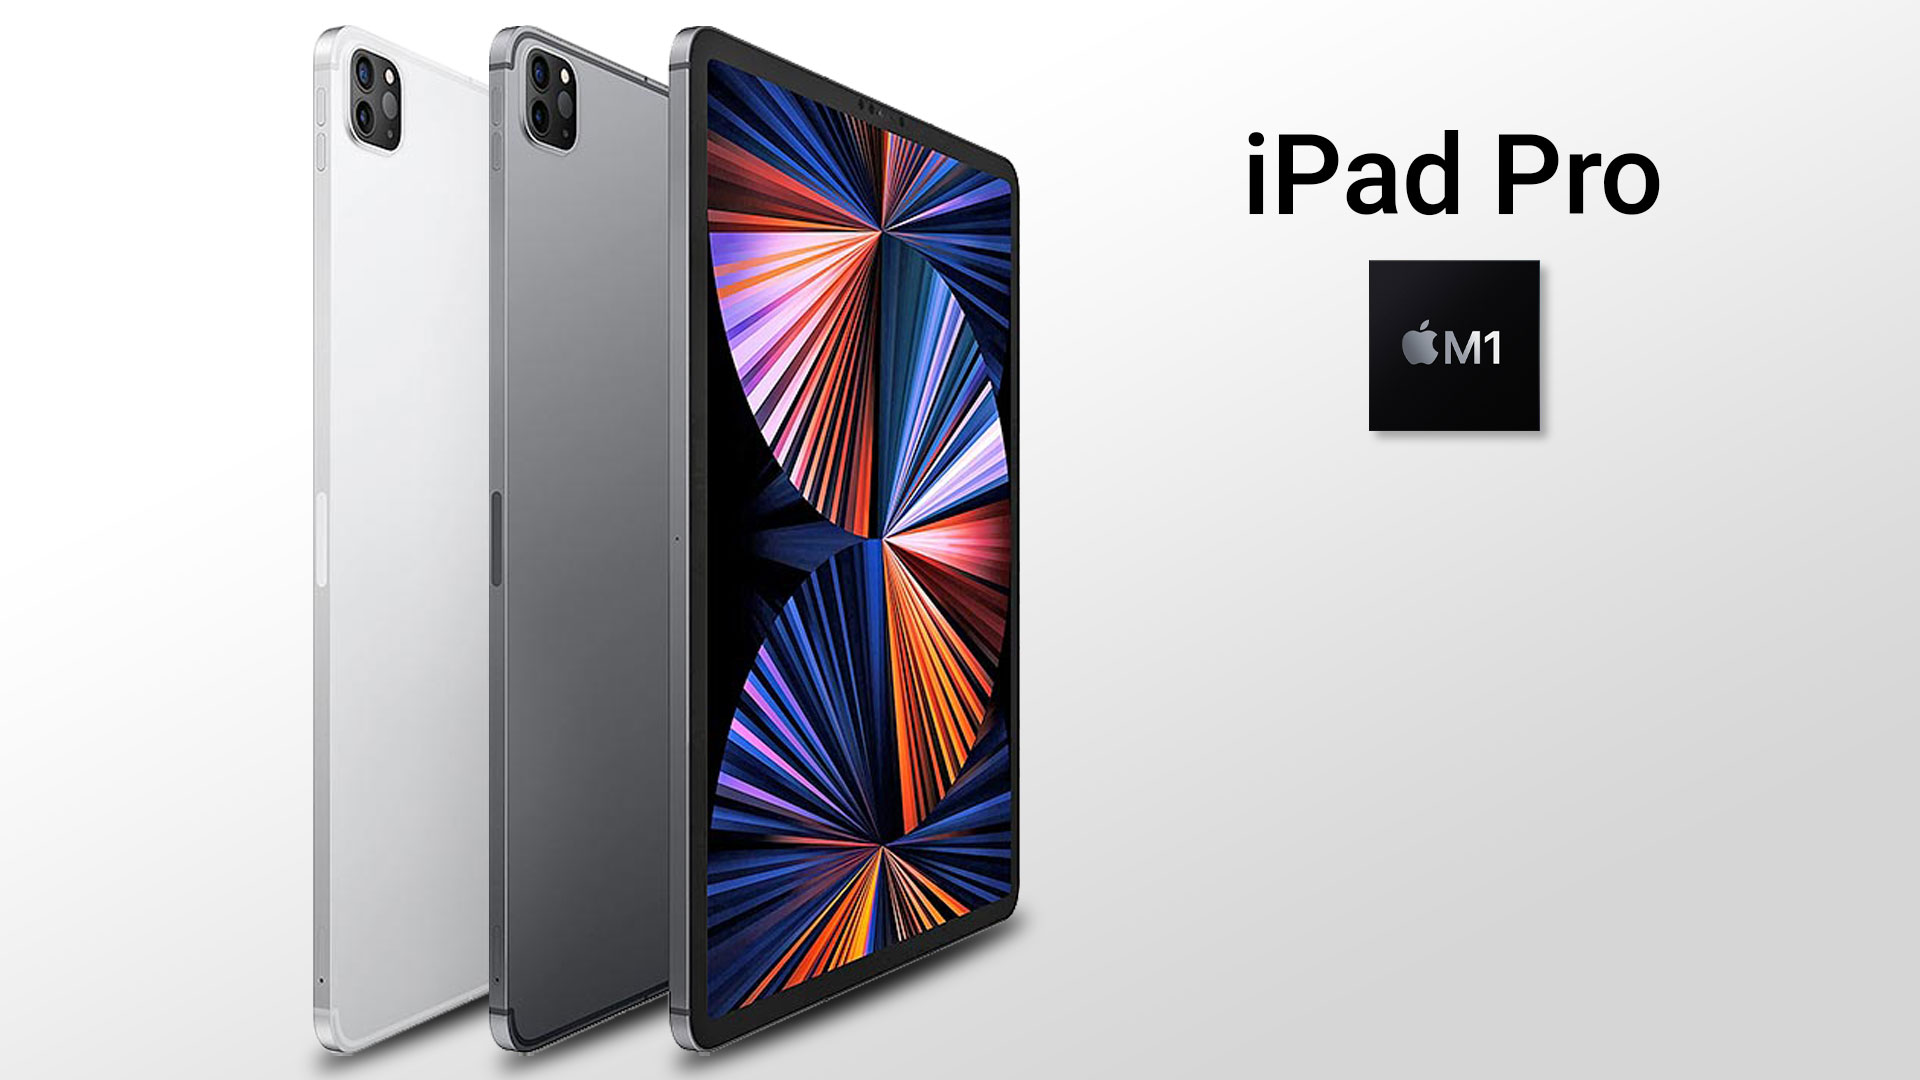 ipad-pro-m1-in-two-colors-design